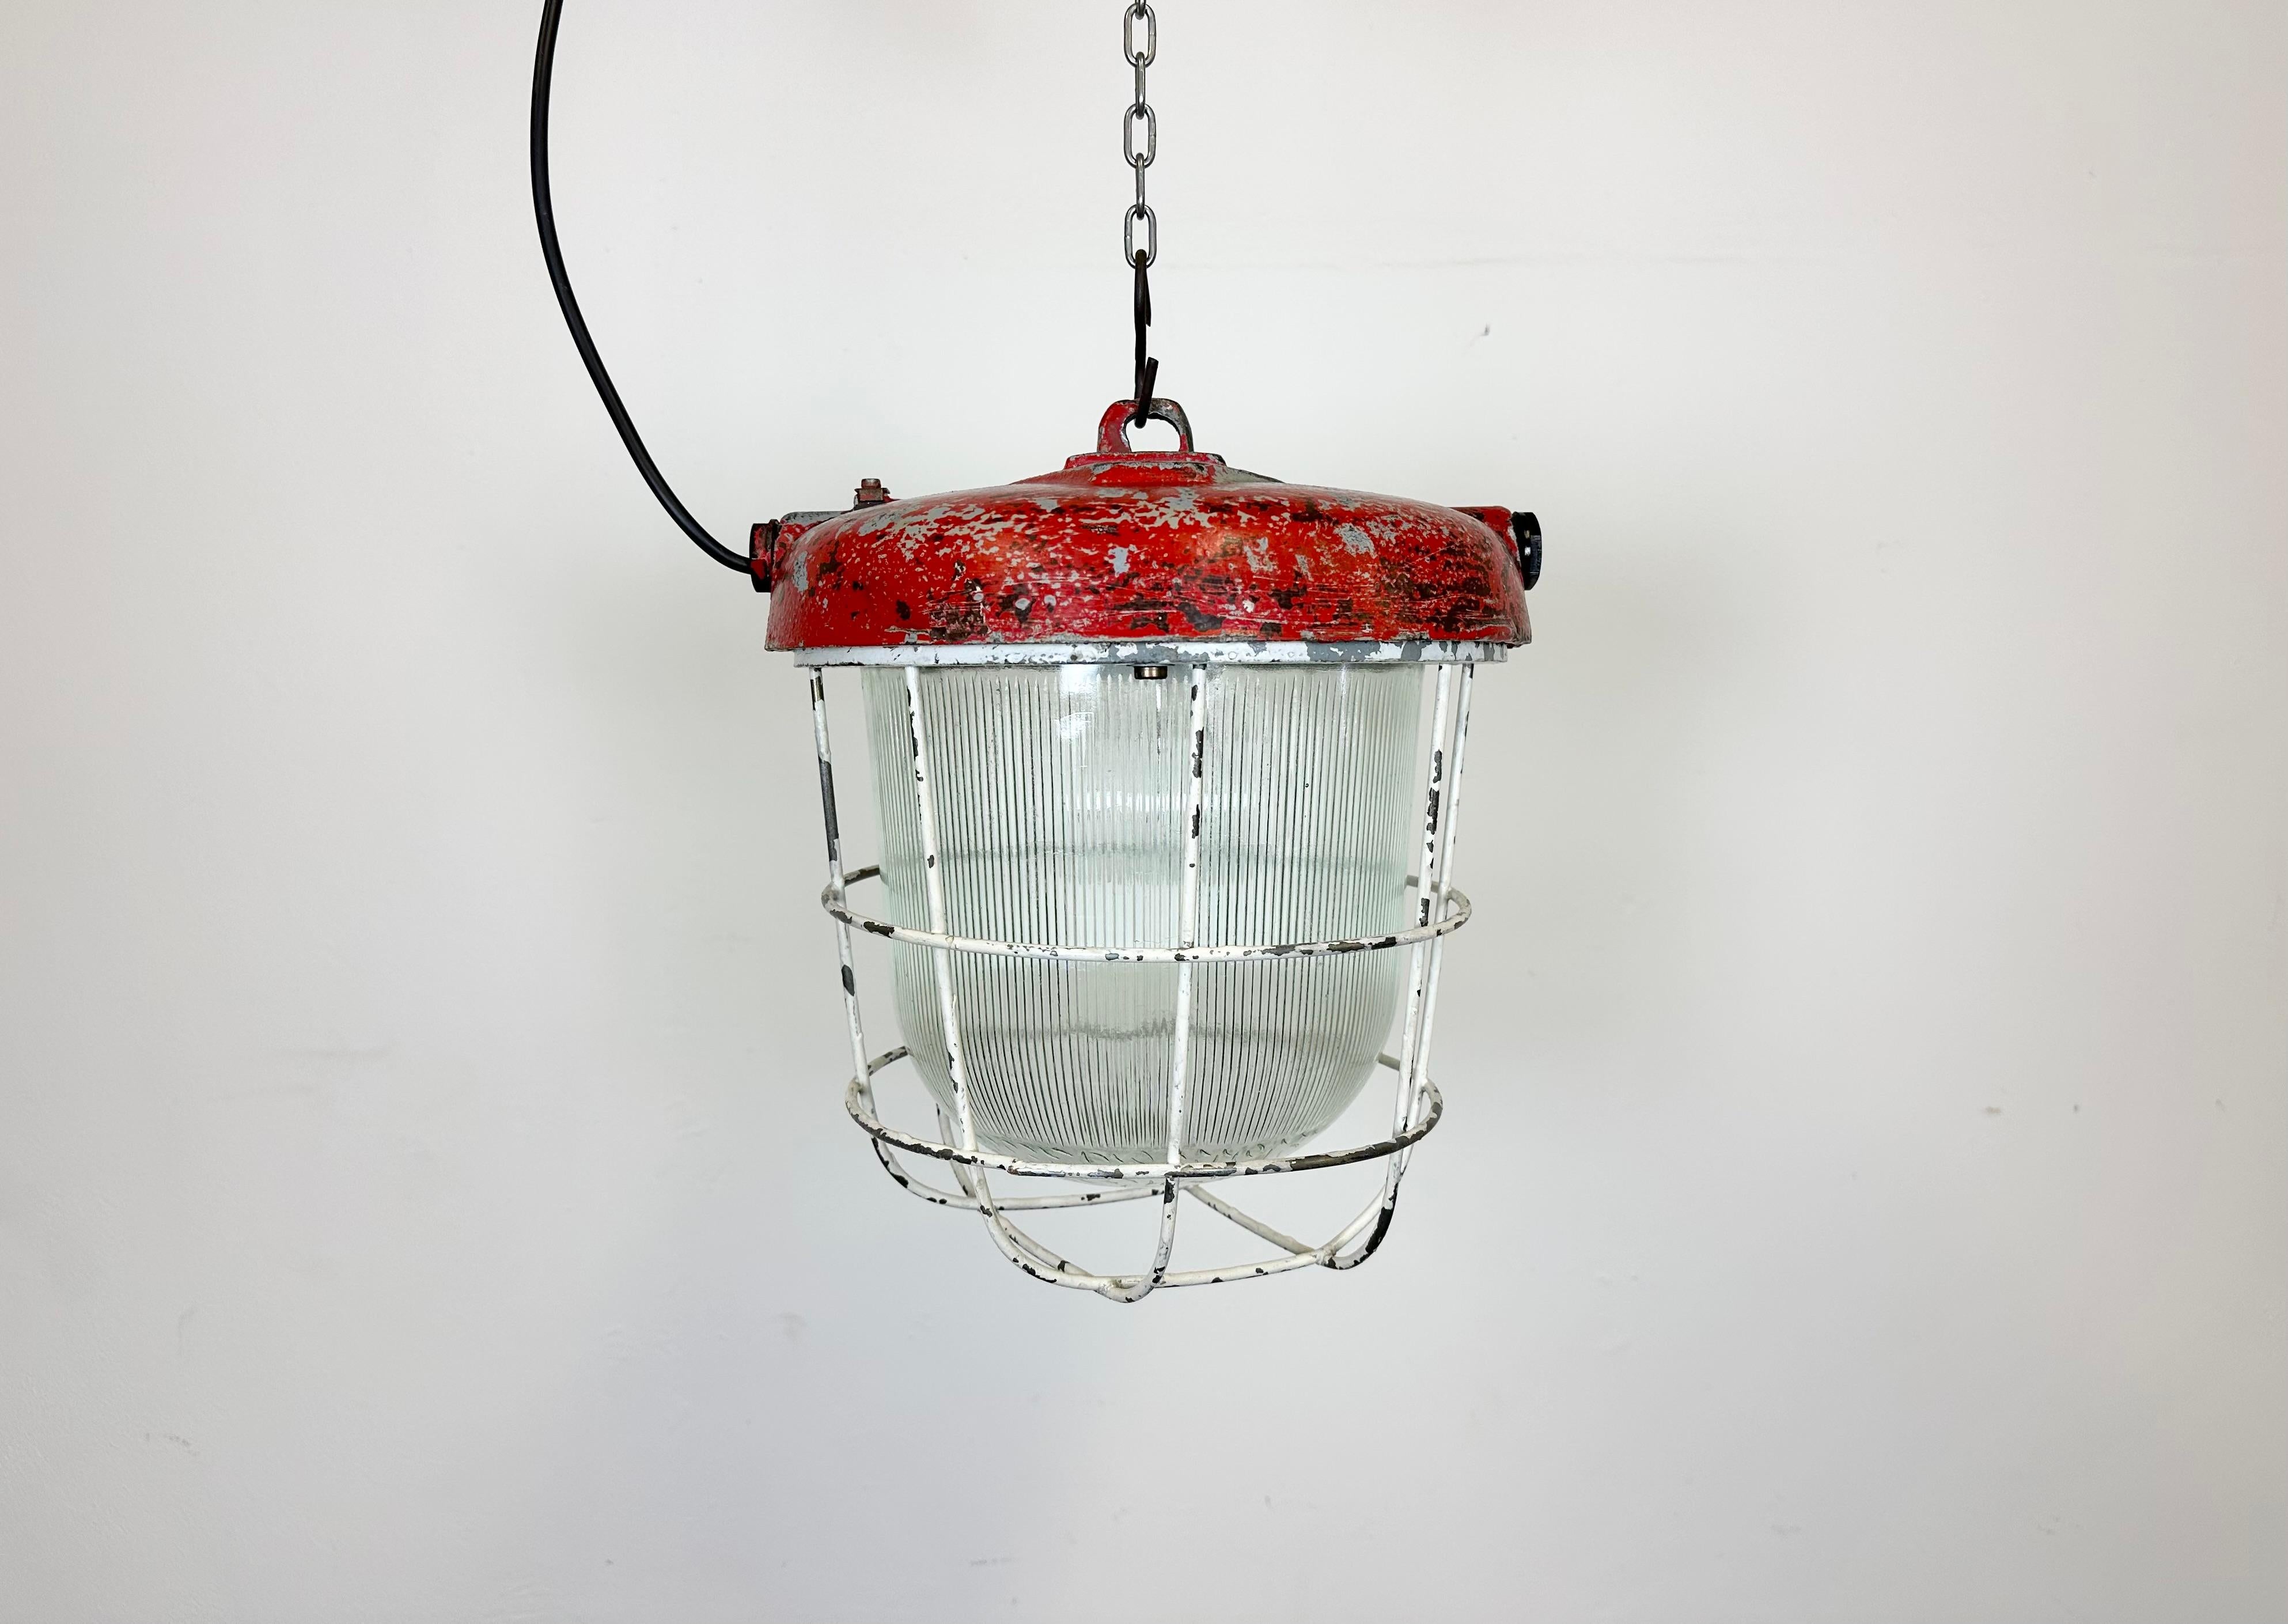 Industrial factory hanging lamp made by Polam Wilkasy in Poland during the 1960s.It features a cast iron top, a striped glass cover and an iron grid. The porcelain socket requires E 27 lightbulbs. New wire. The weight of the lamp is 8 kg.